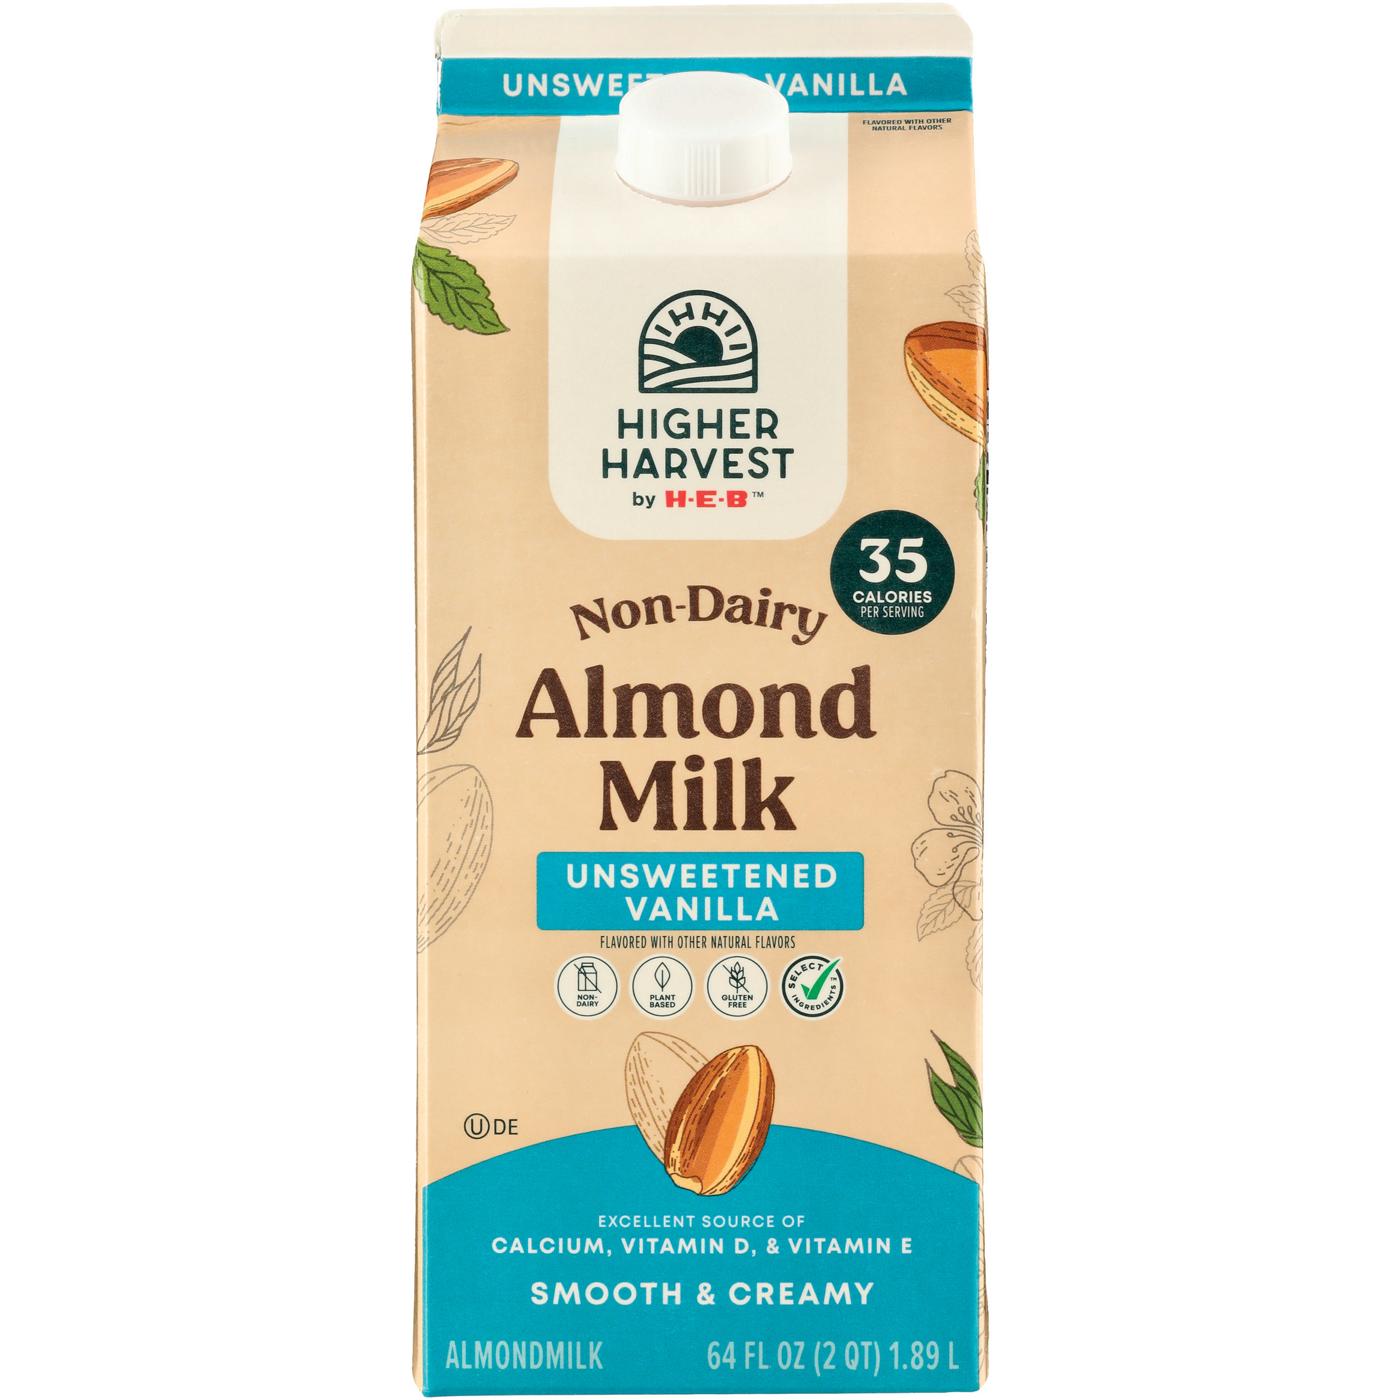 Higher Harvest by H-E-B Non-Dairy Almond Milk – Unsweetened Vanilla; image 1 of 2